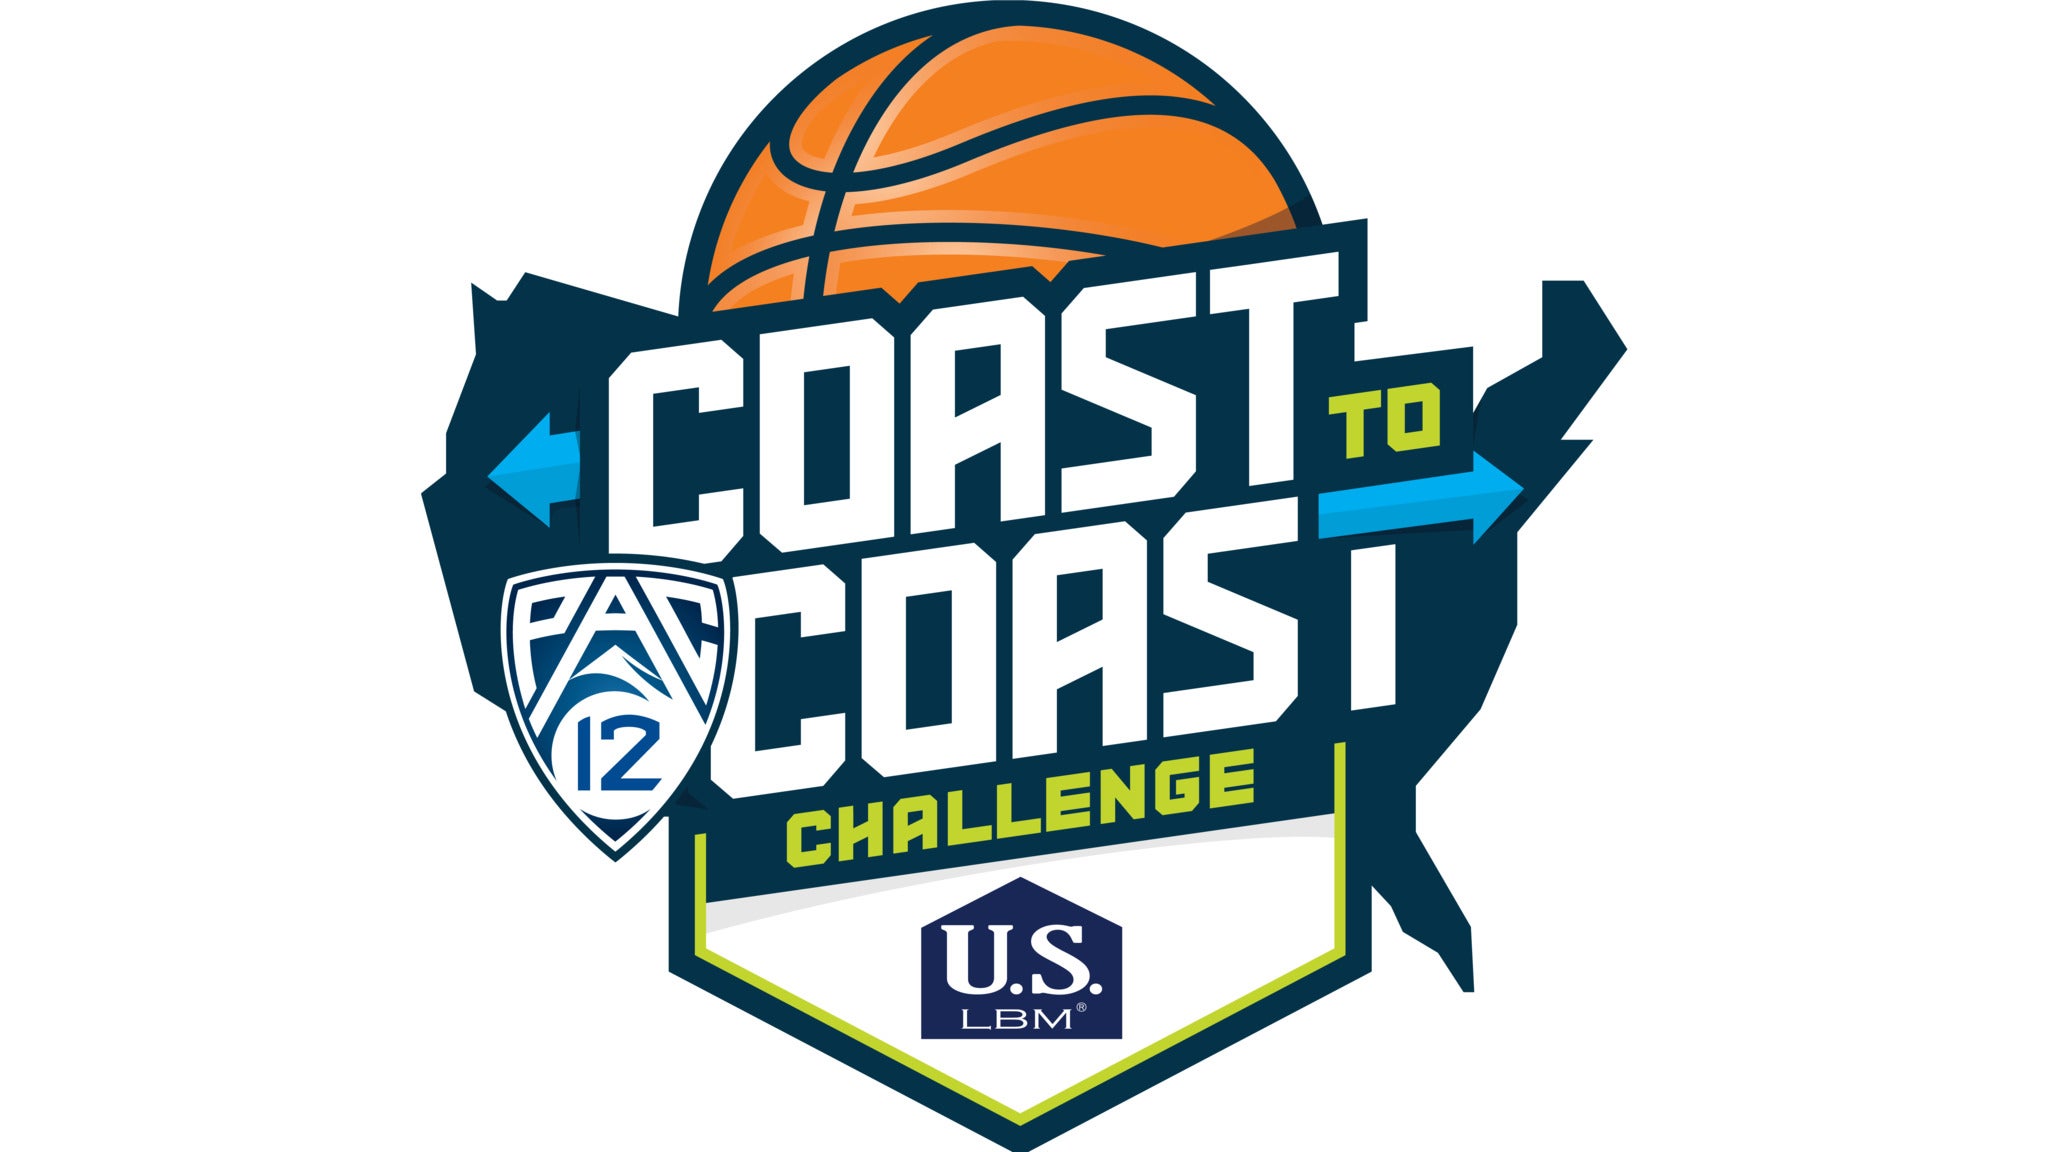 presale password for Pac-12 US LBM Coast-to-Coast Challenge: Texas Men & Women's Basketball tickets in Dallas - TX (American Airlines Center)